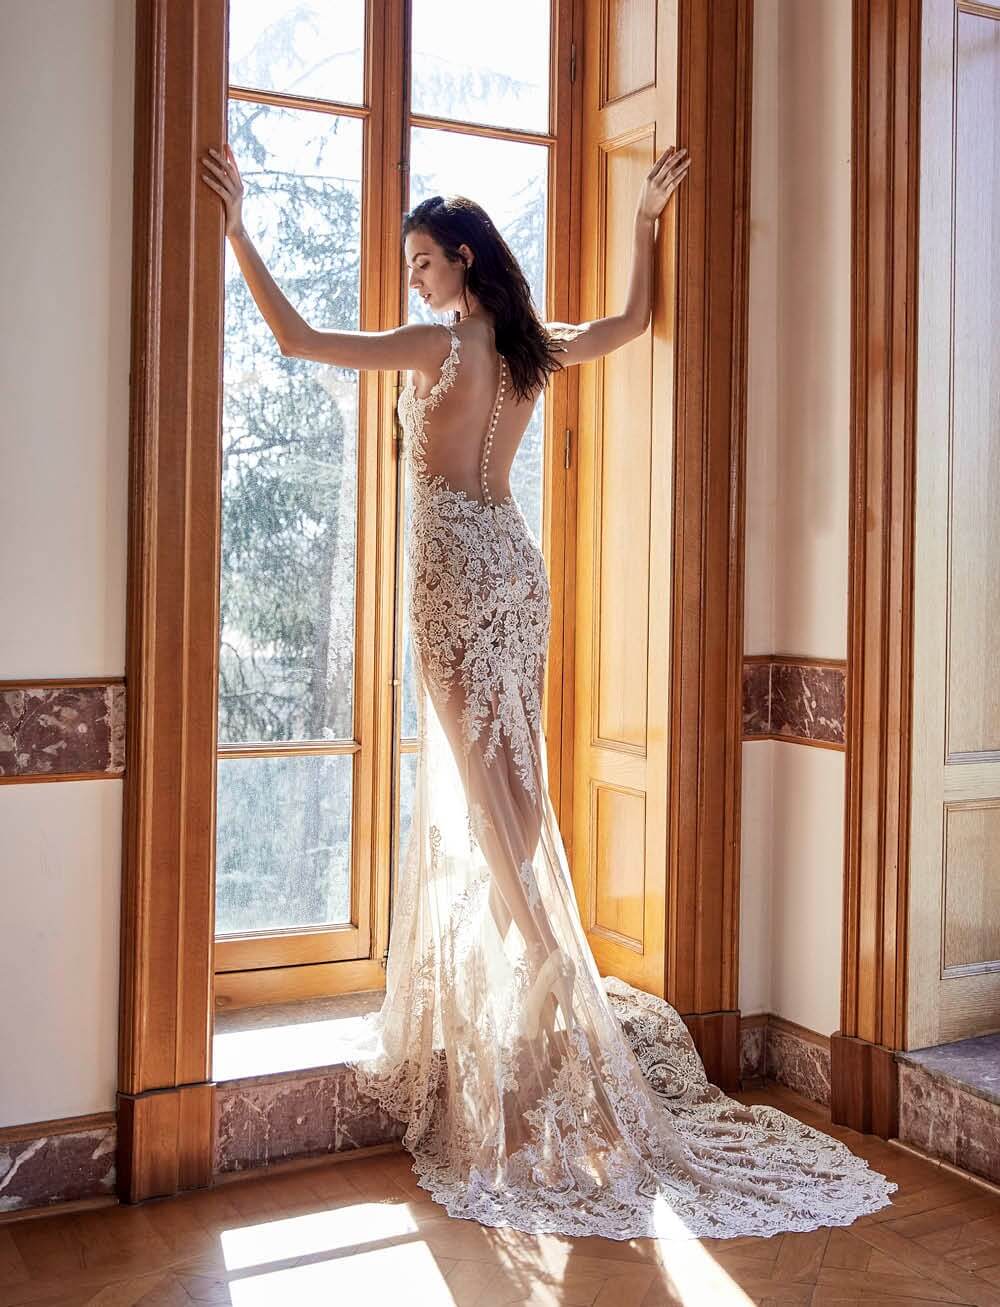 Creme Couture- Woman in gorgeous wedding dress